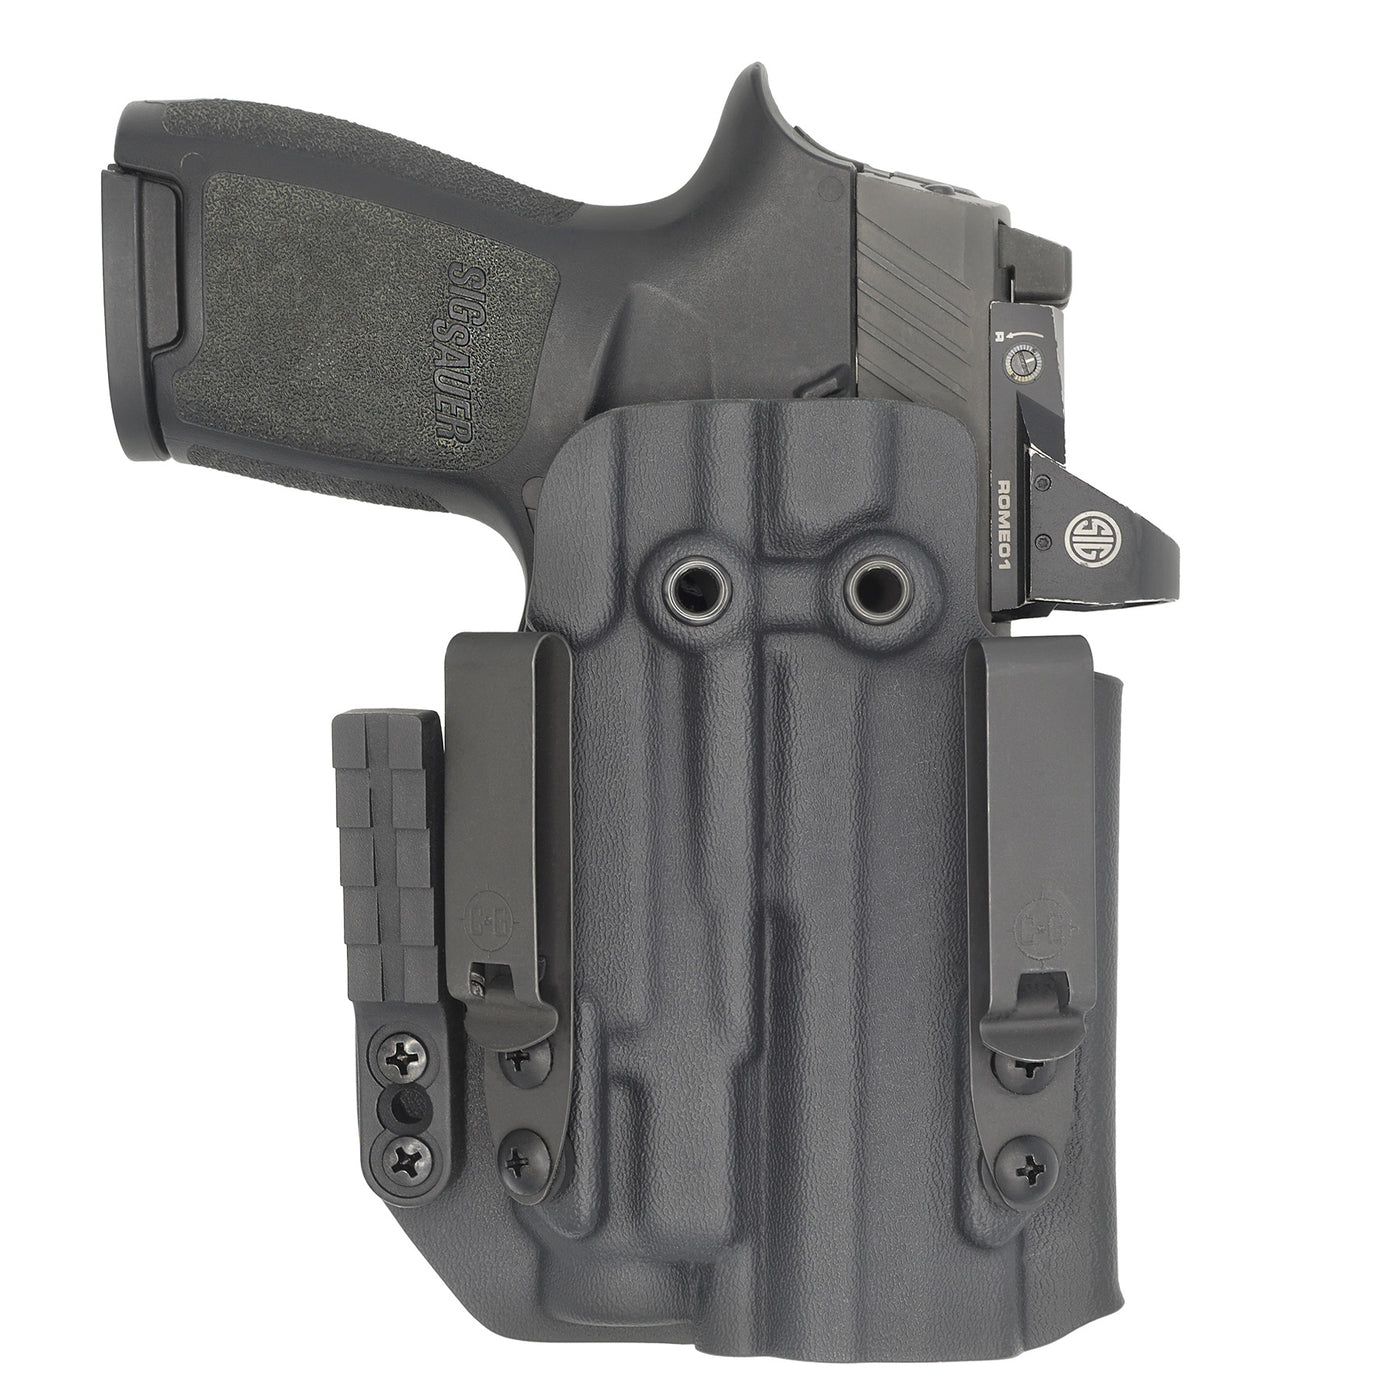 C&G Holsters custom IWB ALPHA UPGRADE Tactical masada streamlight TLR7/a in holstered position